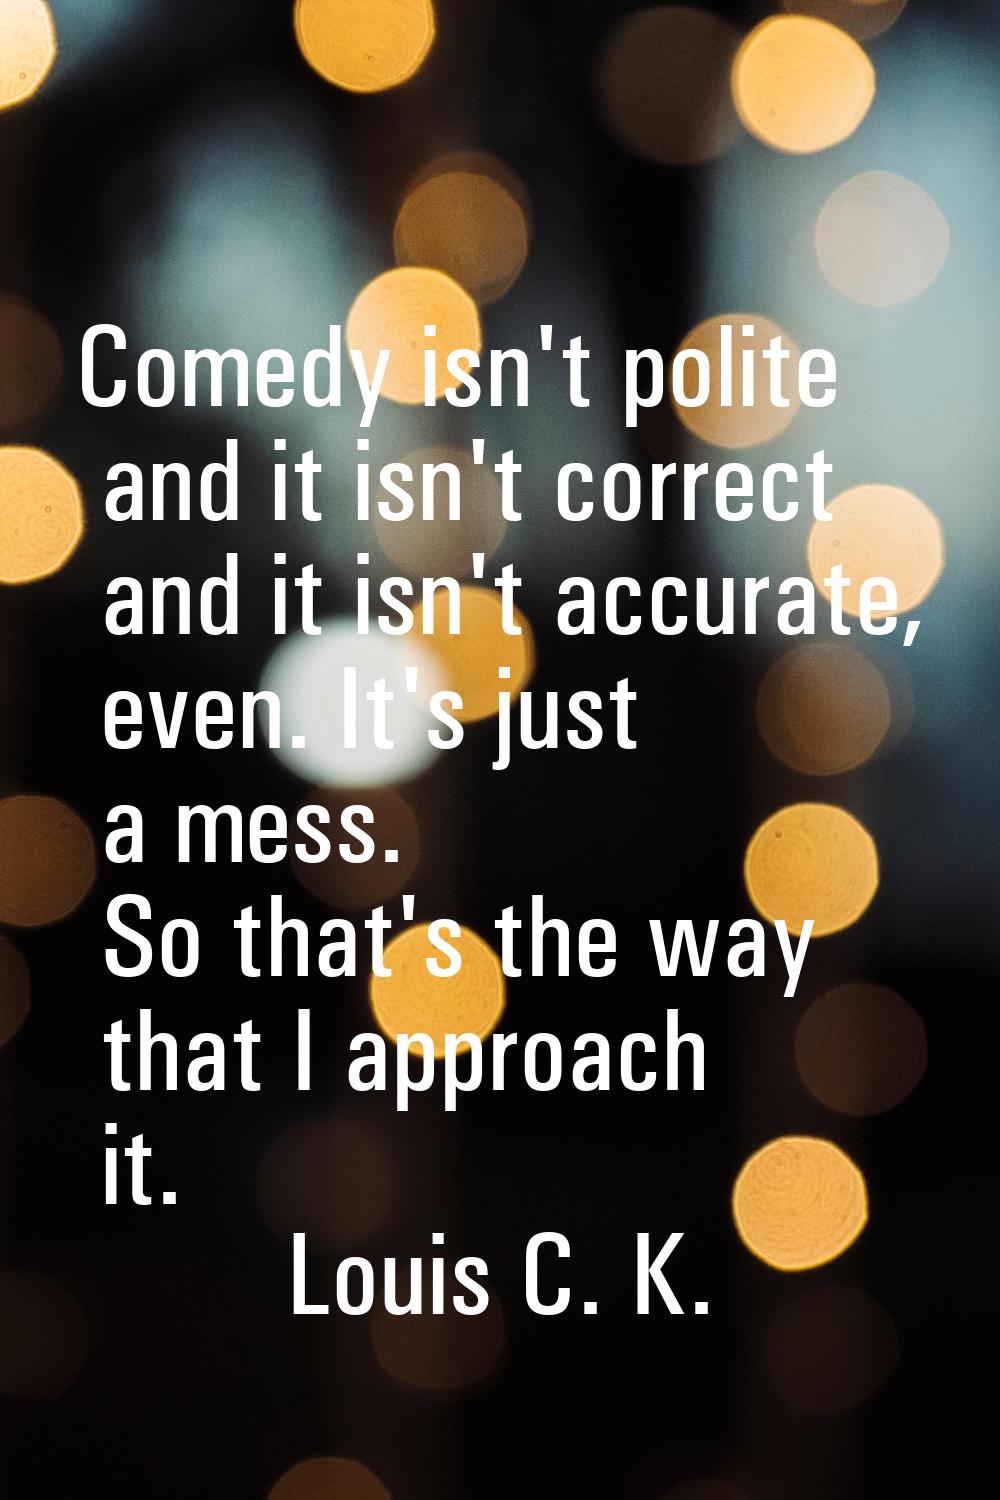 Comedy isn't polite and it isn't correct and it isn't accurate, even. It's just a mess. So that's t